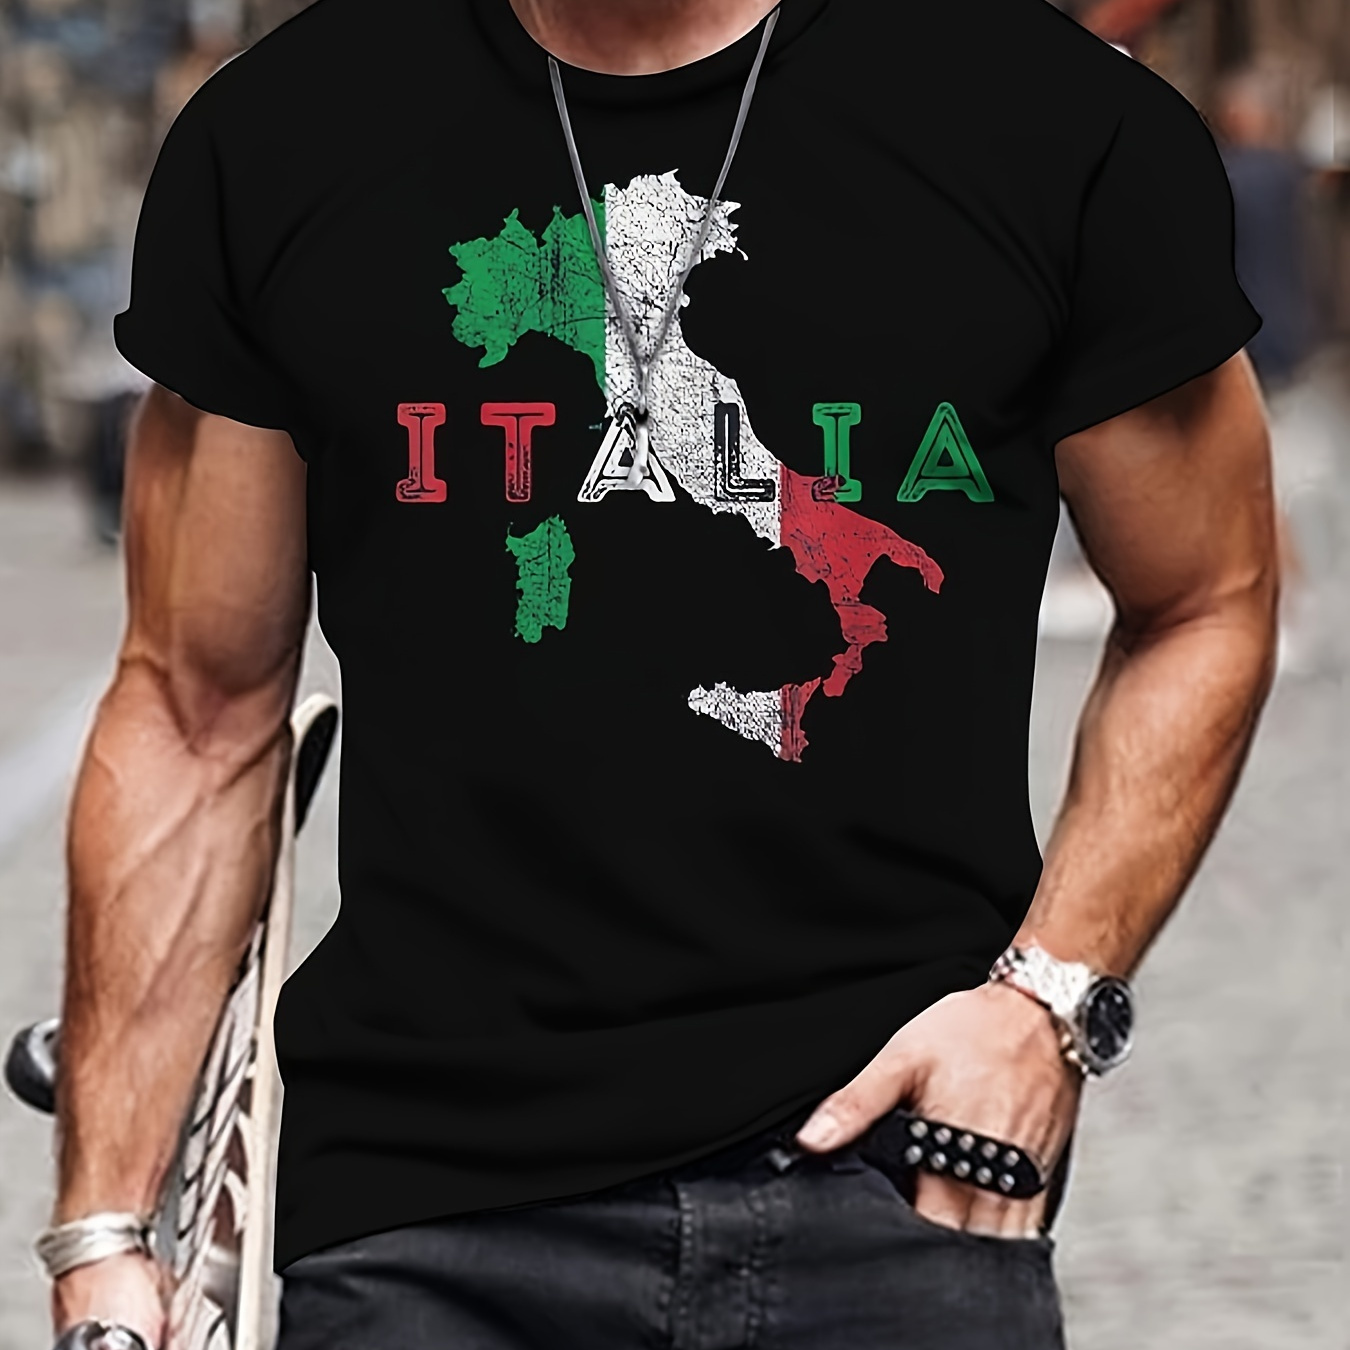 

Italy Theme Color Block Country Map And Italia Letter Print Crew Neck And Short Sleeve T-shirt, Summer Tops For Men's Casual And Street Wear